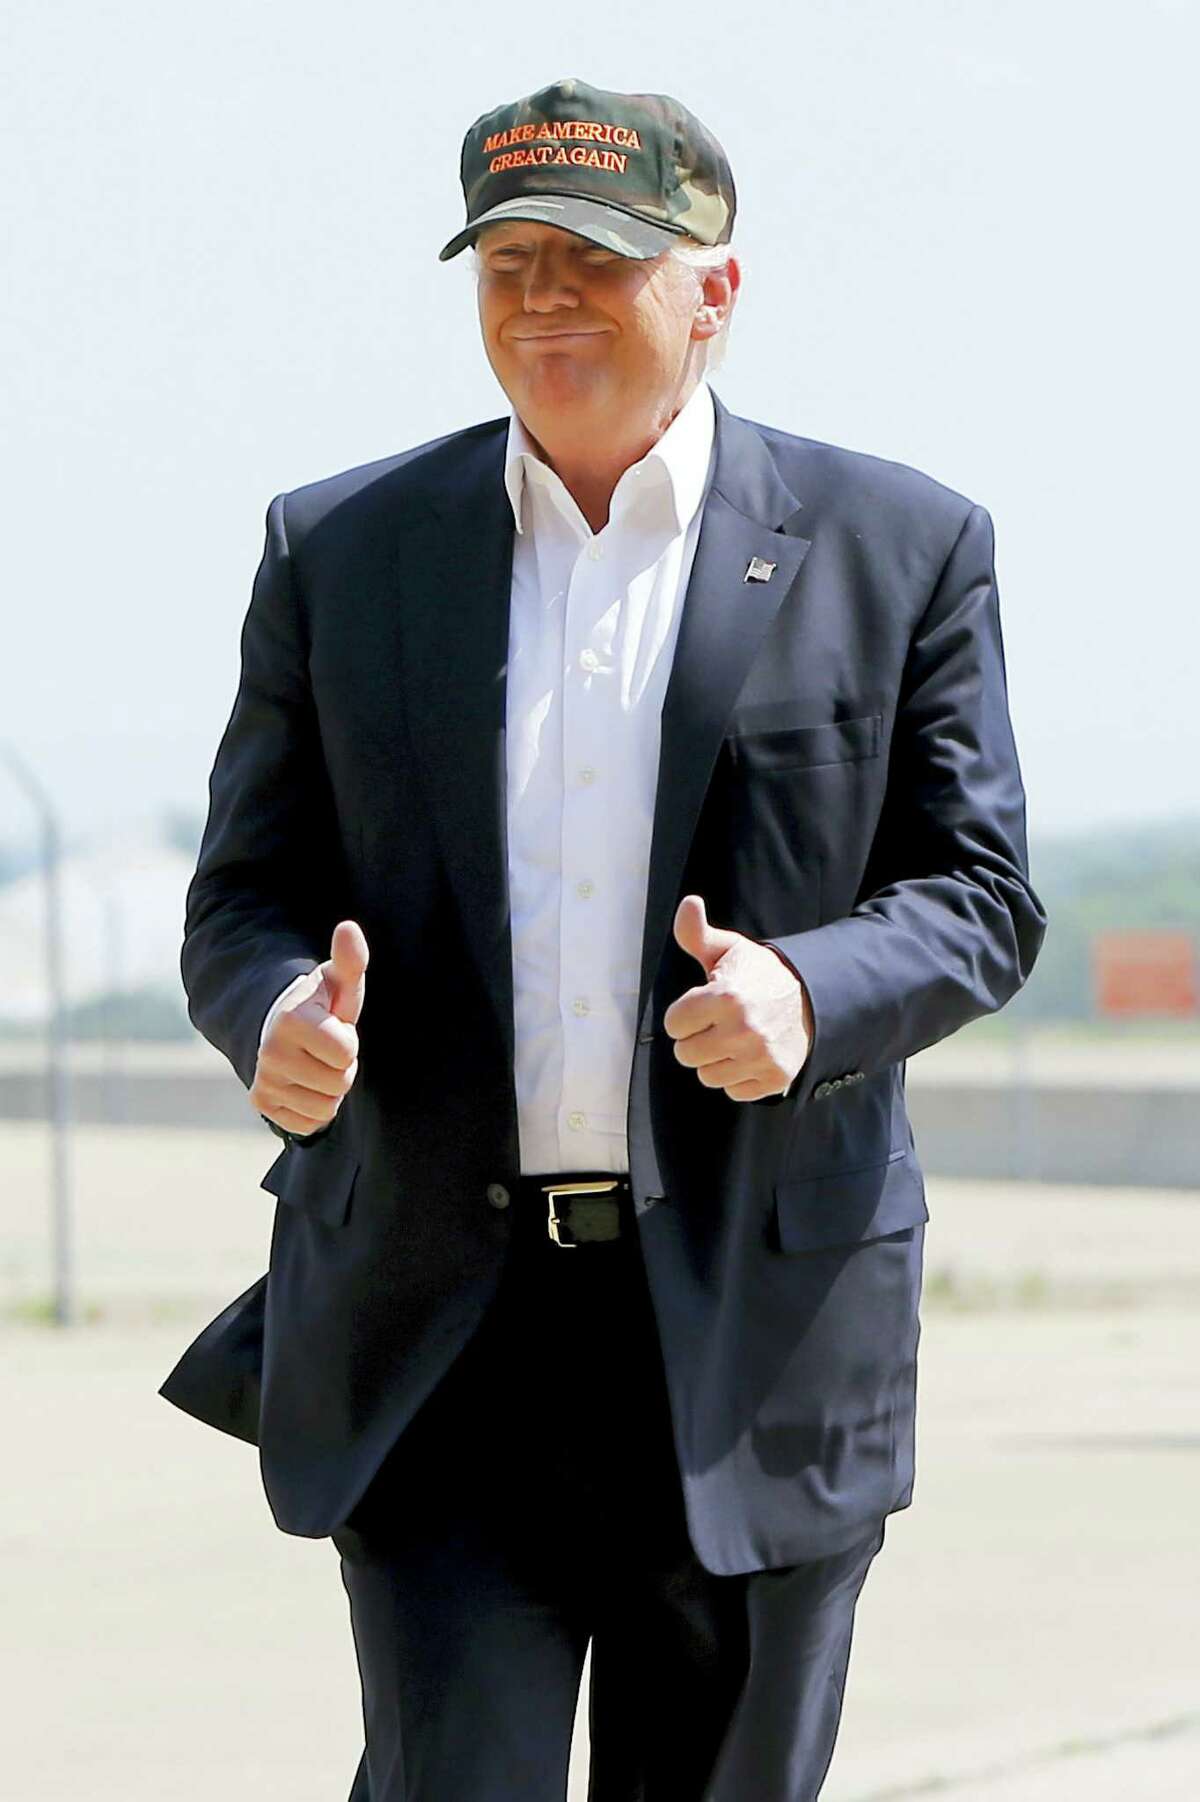 Republican presidential candidate Donald Trump gives a thumbs up as he arrives for a campaign rally Saturday at a private hanger at Greater Pittsburgh International Airport in Moon, Pennsylvania.